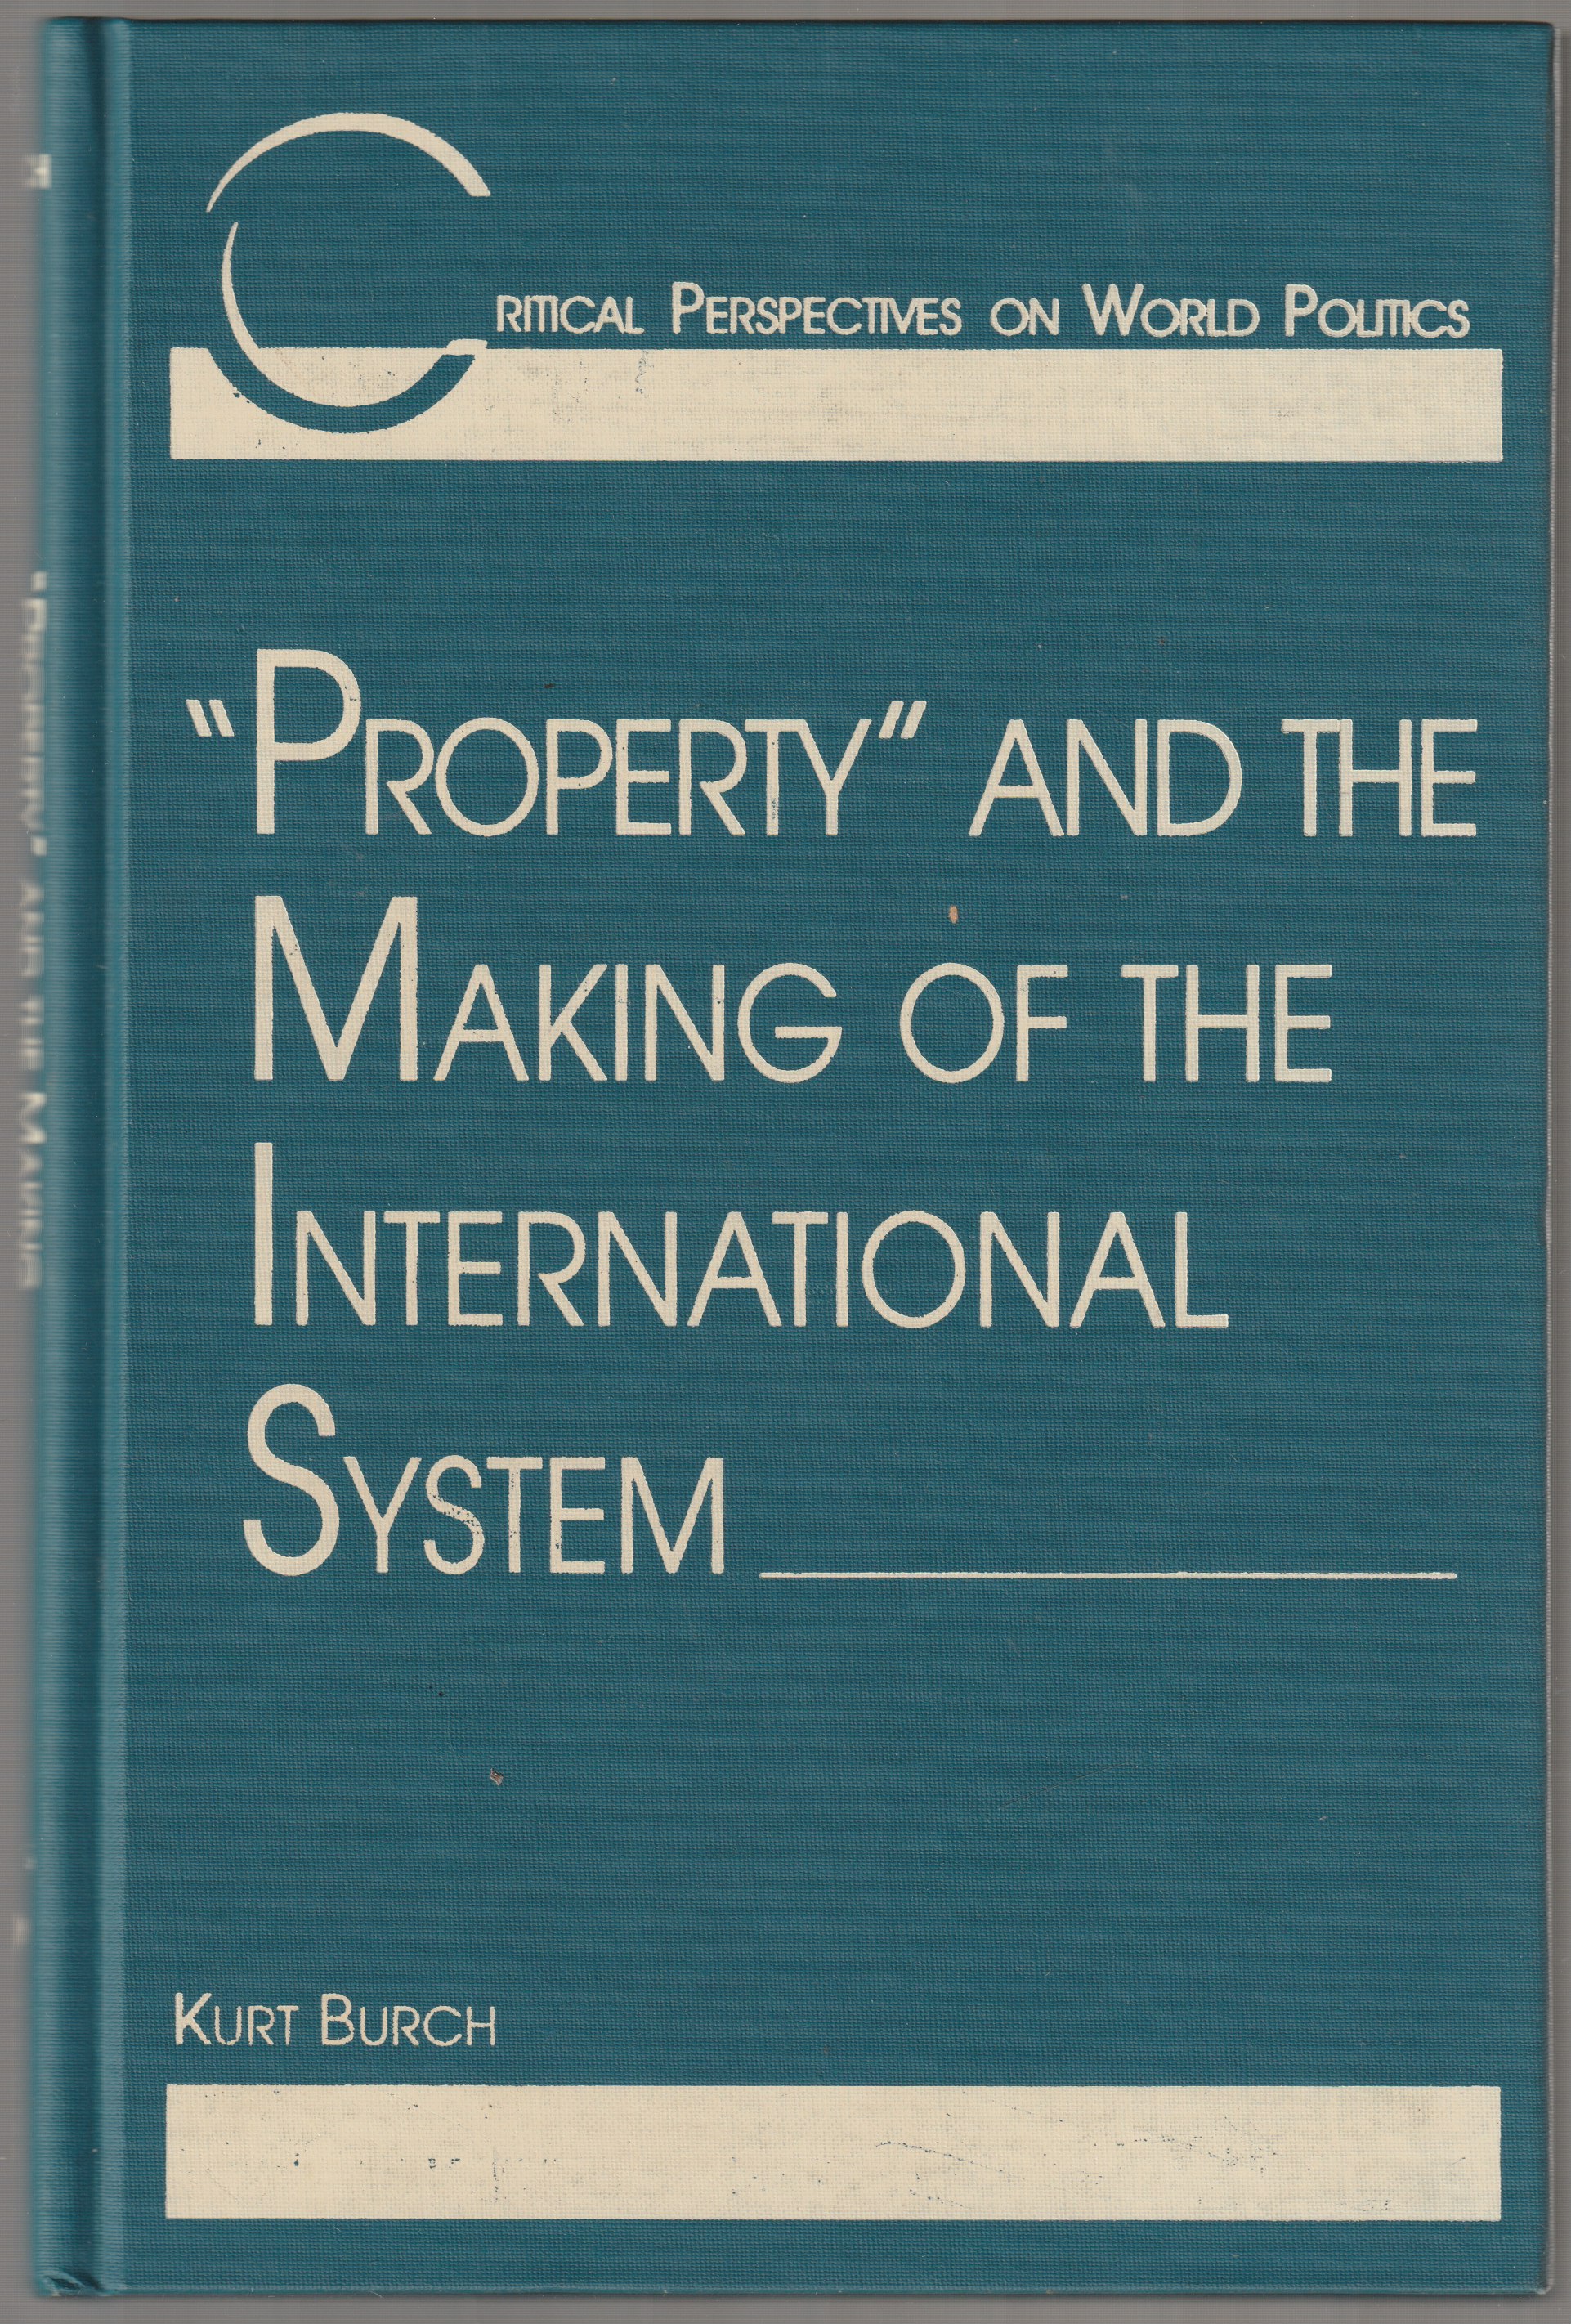 "Property" and the making of the international system.